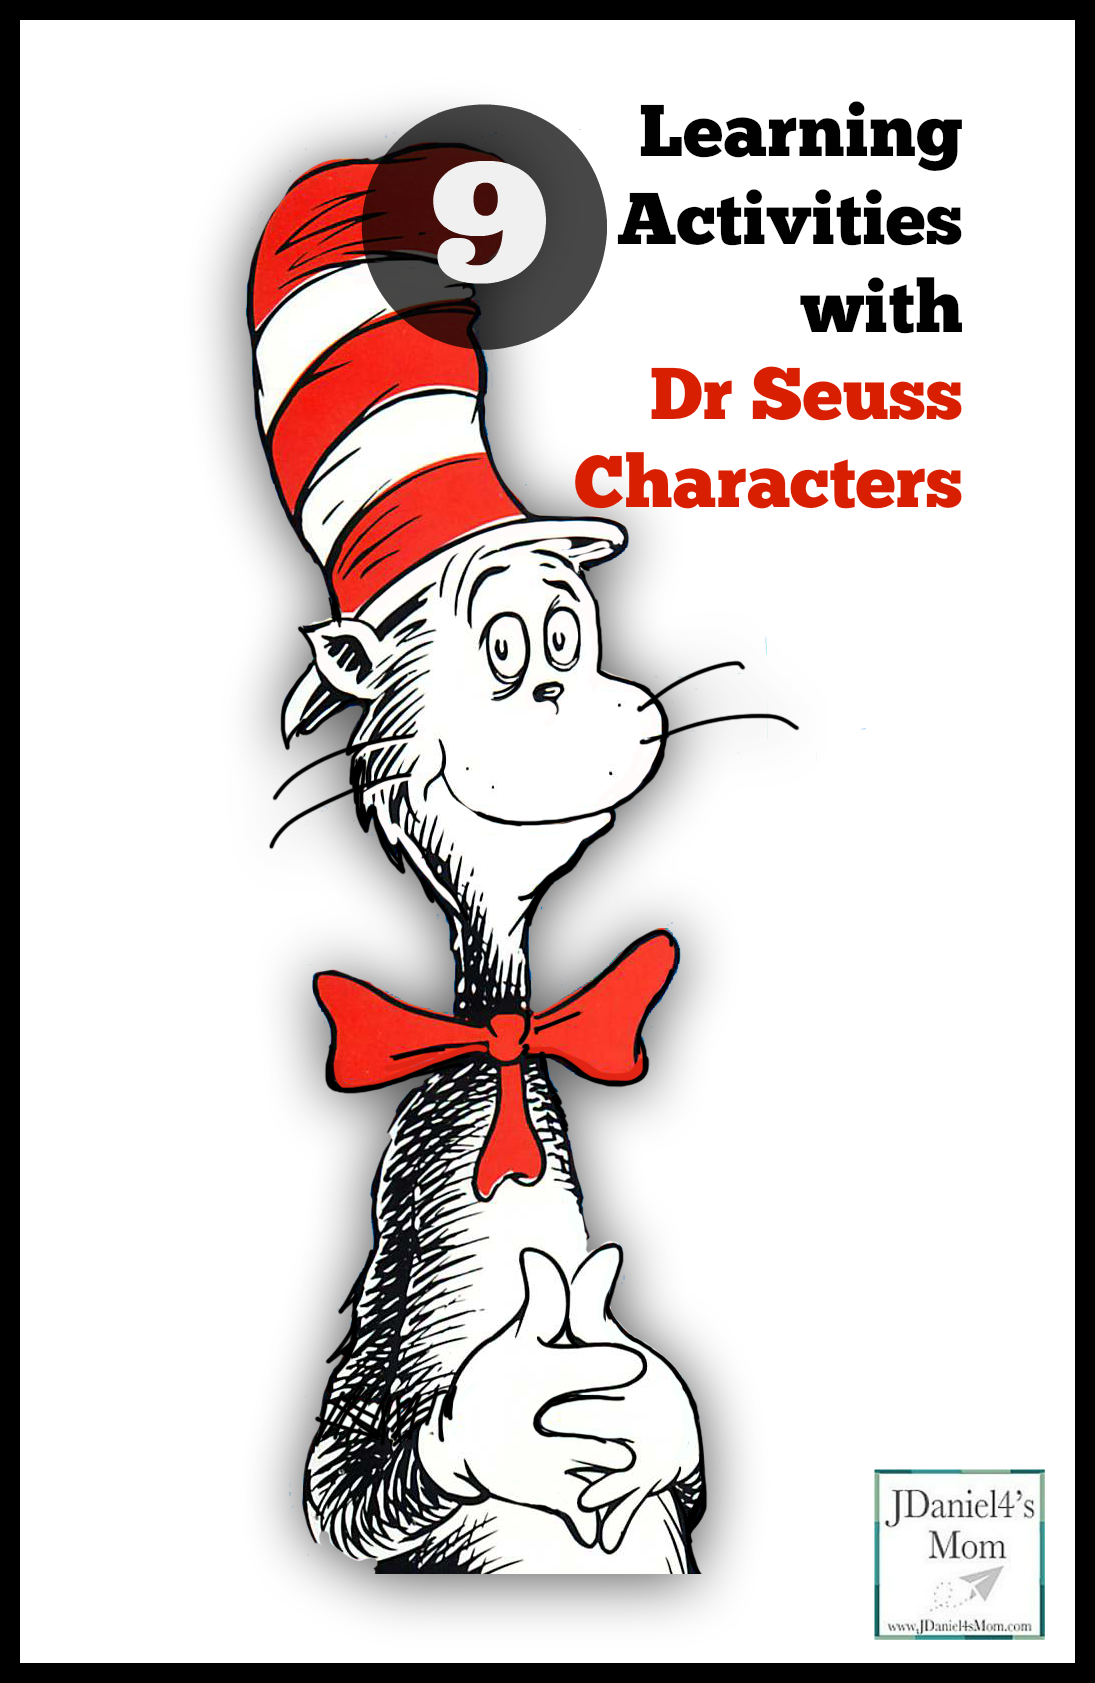 Learning Activities with Dr Seuss Characters